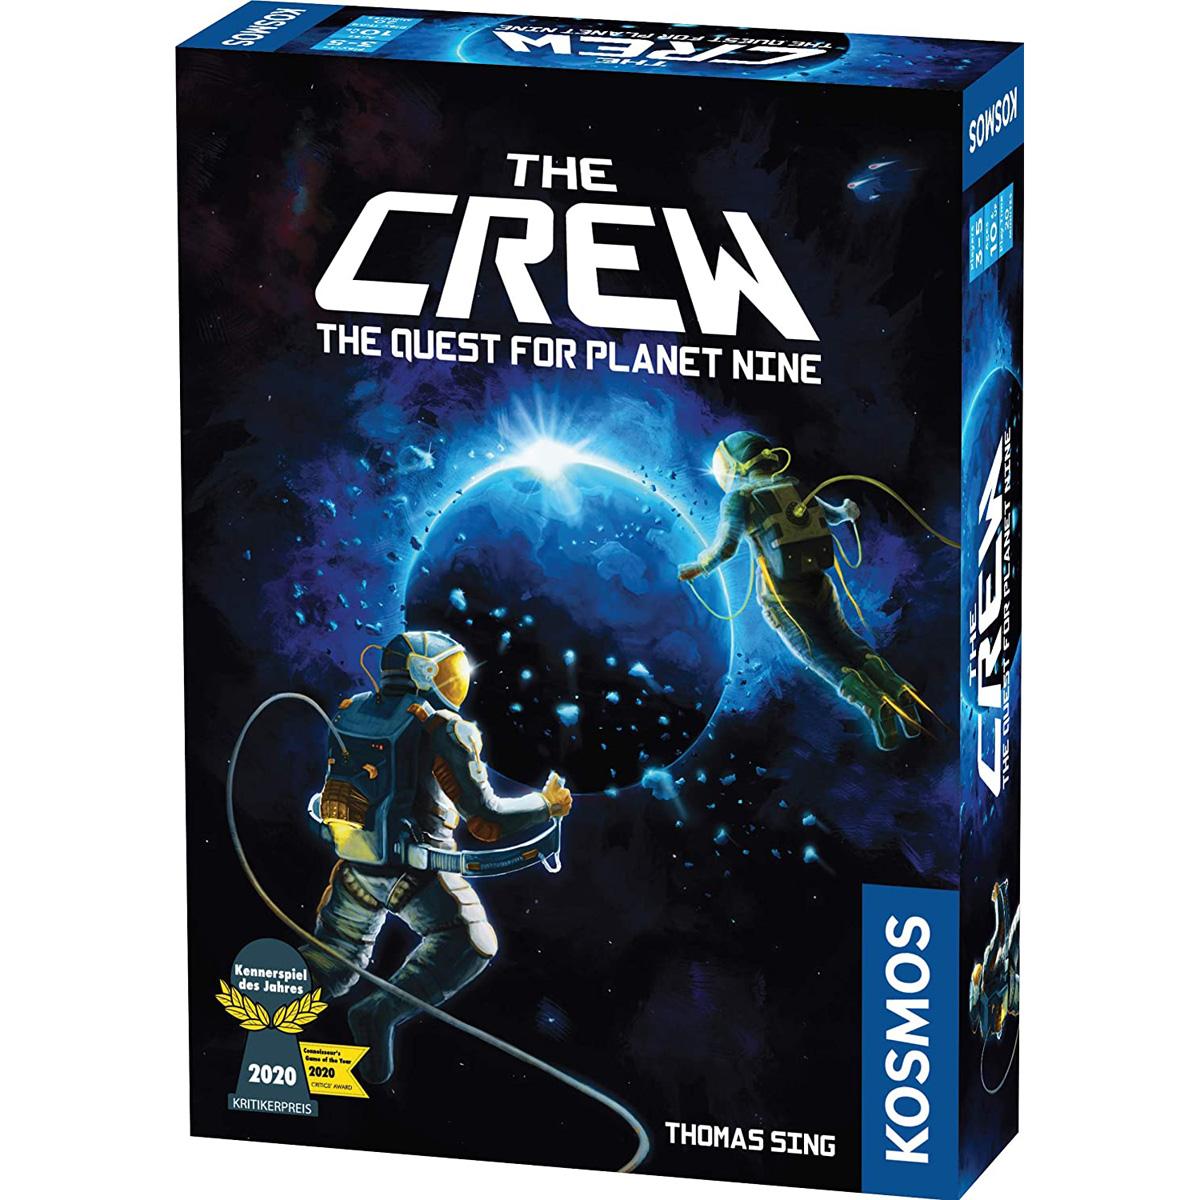 The Crew Quest for Planet Nine Card Game for $5.09